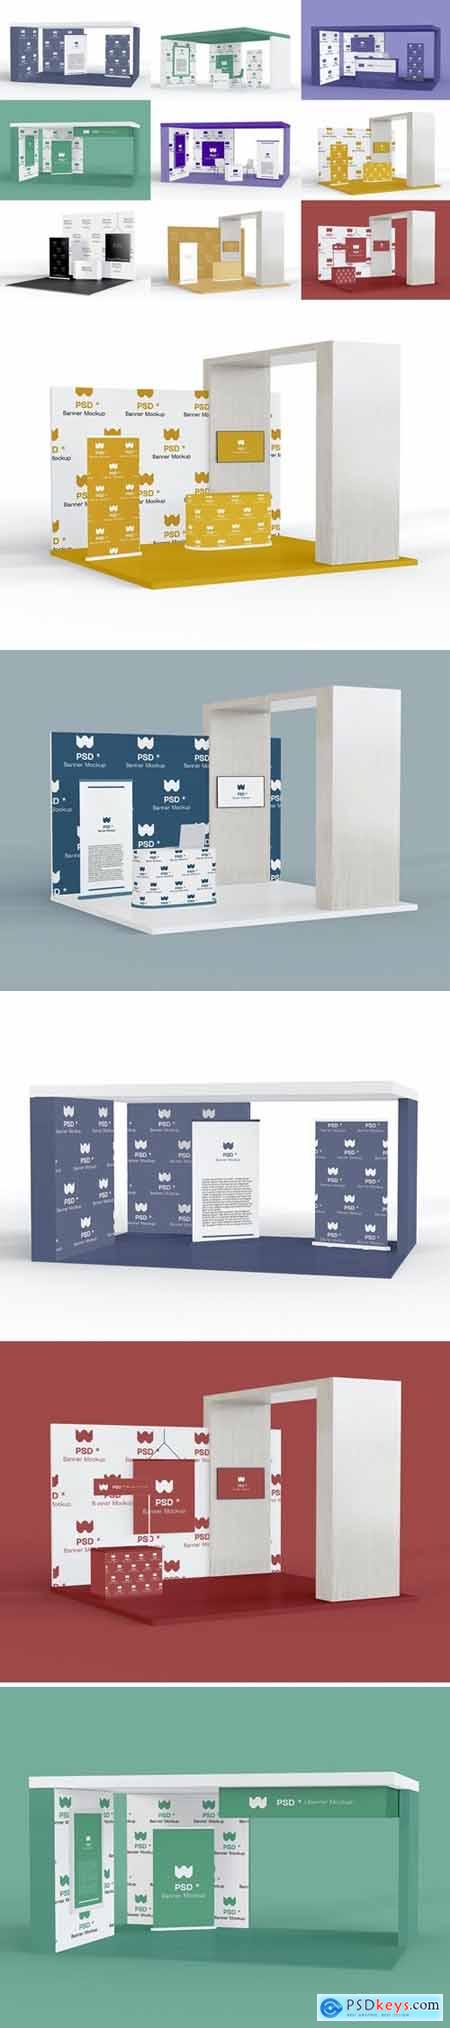 Exhibition Stands Mockup